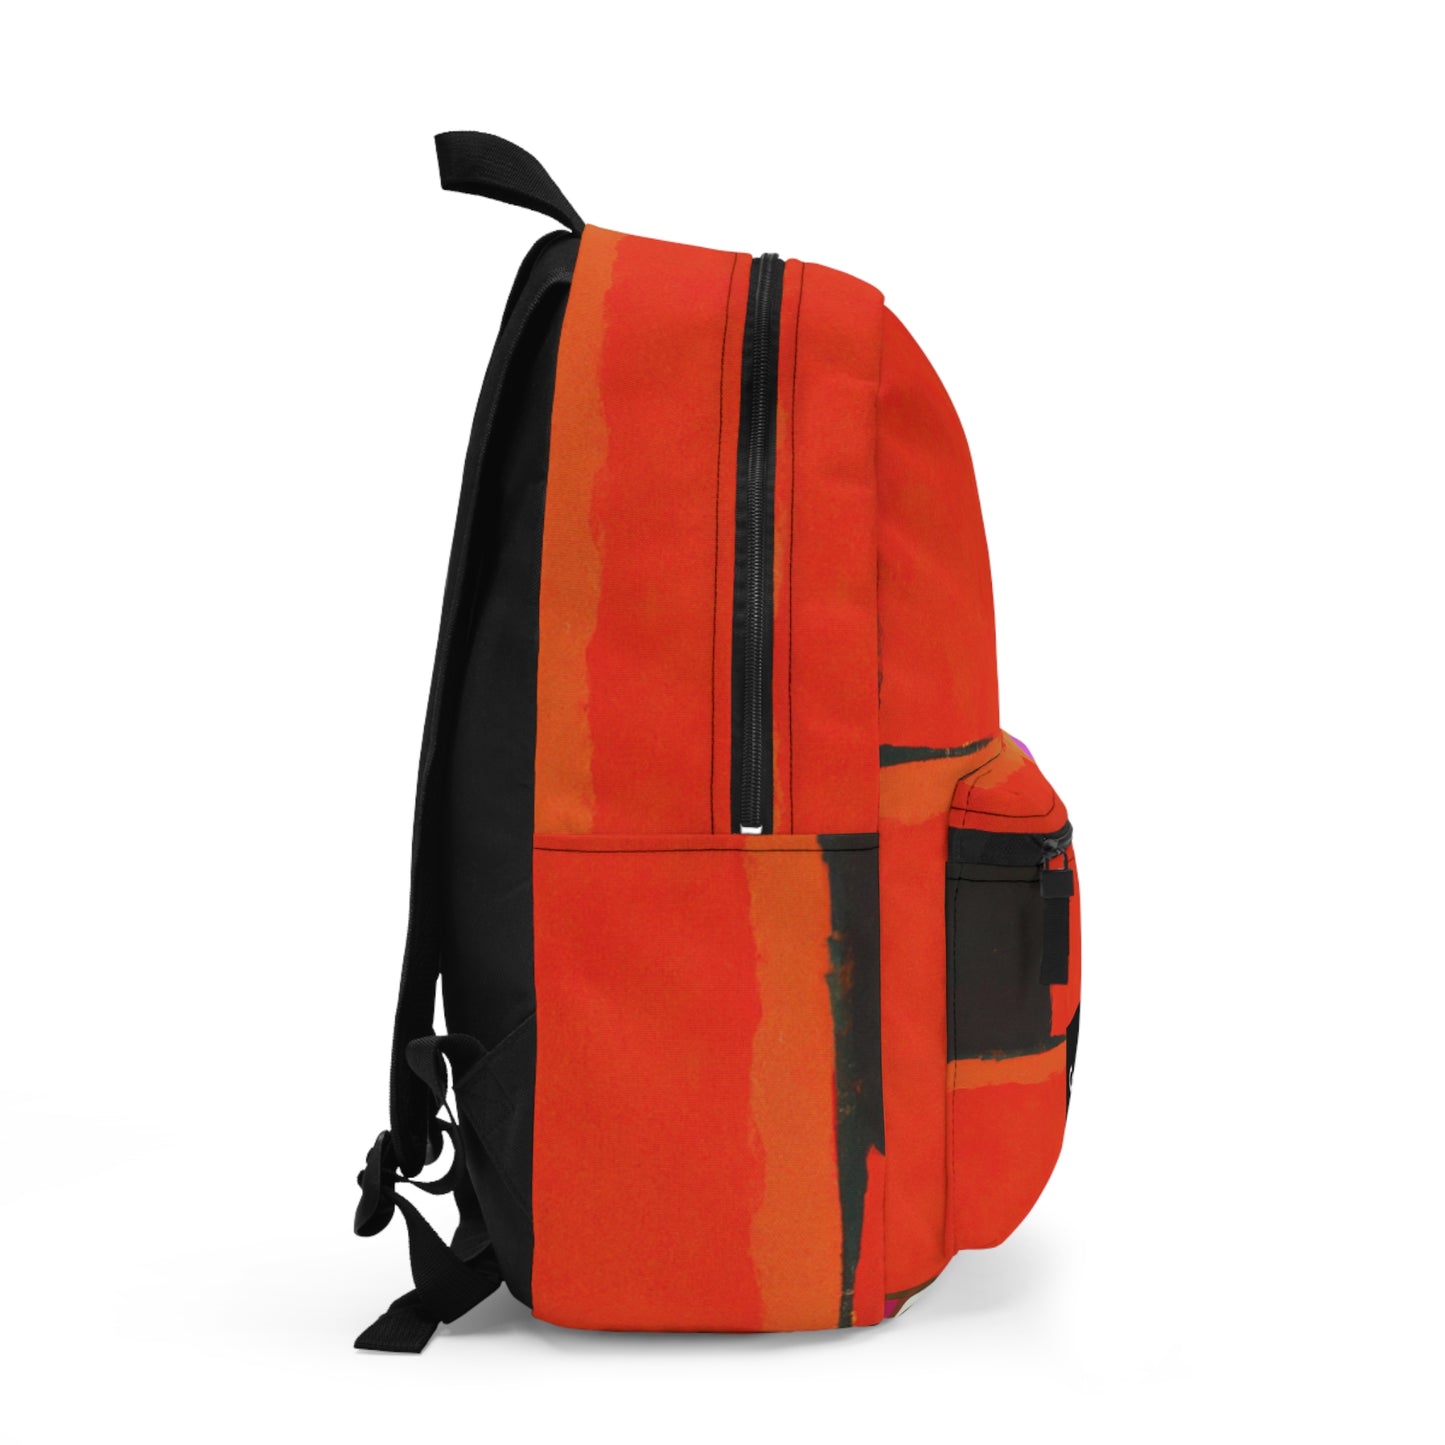 Can't Get Enough of Your Love, Babe 202375 - Backpack